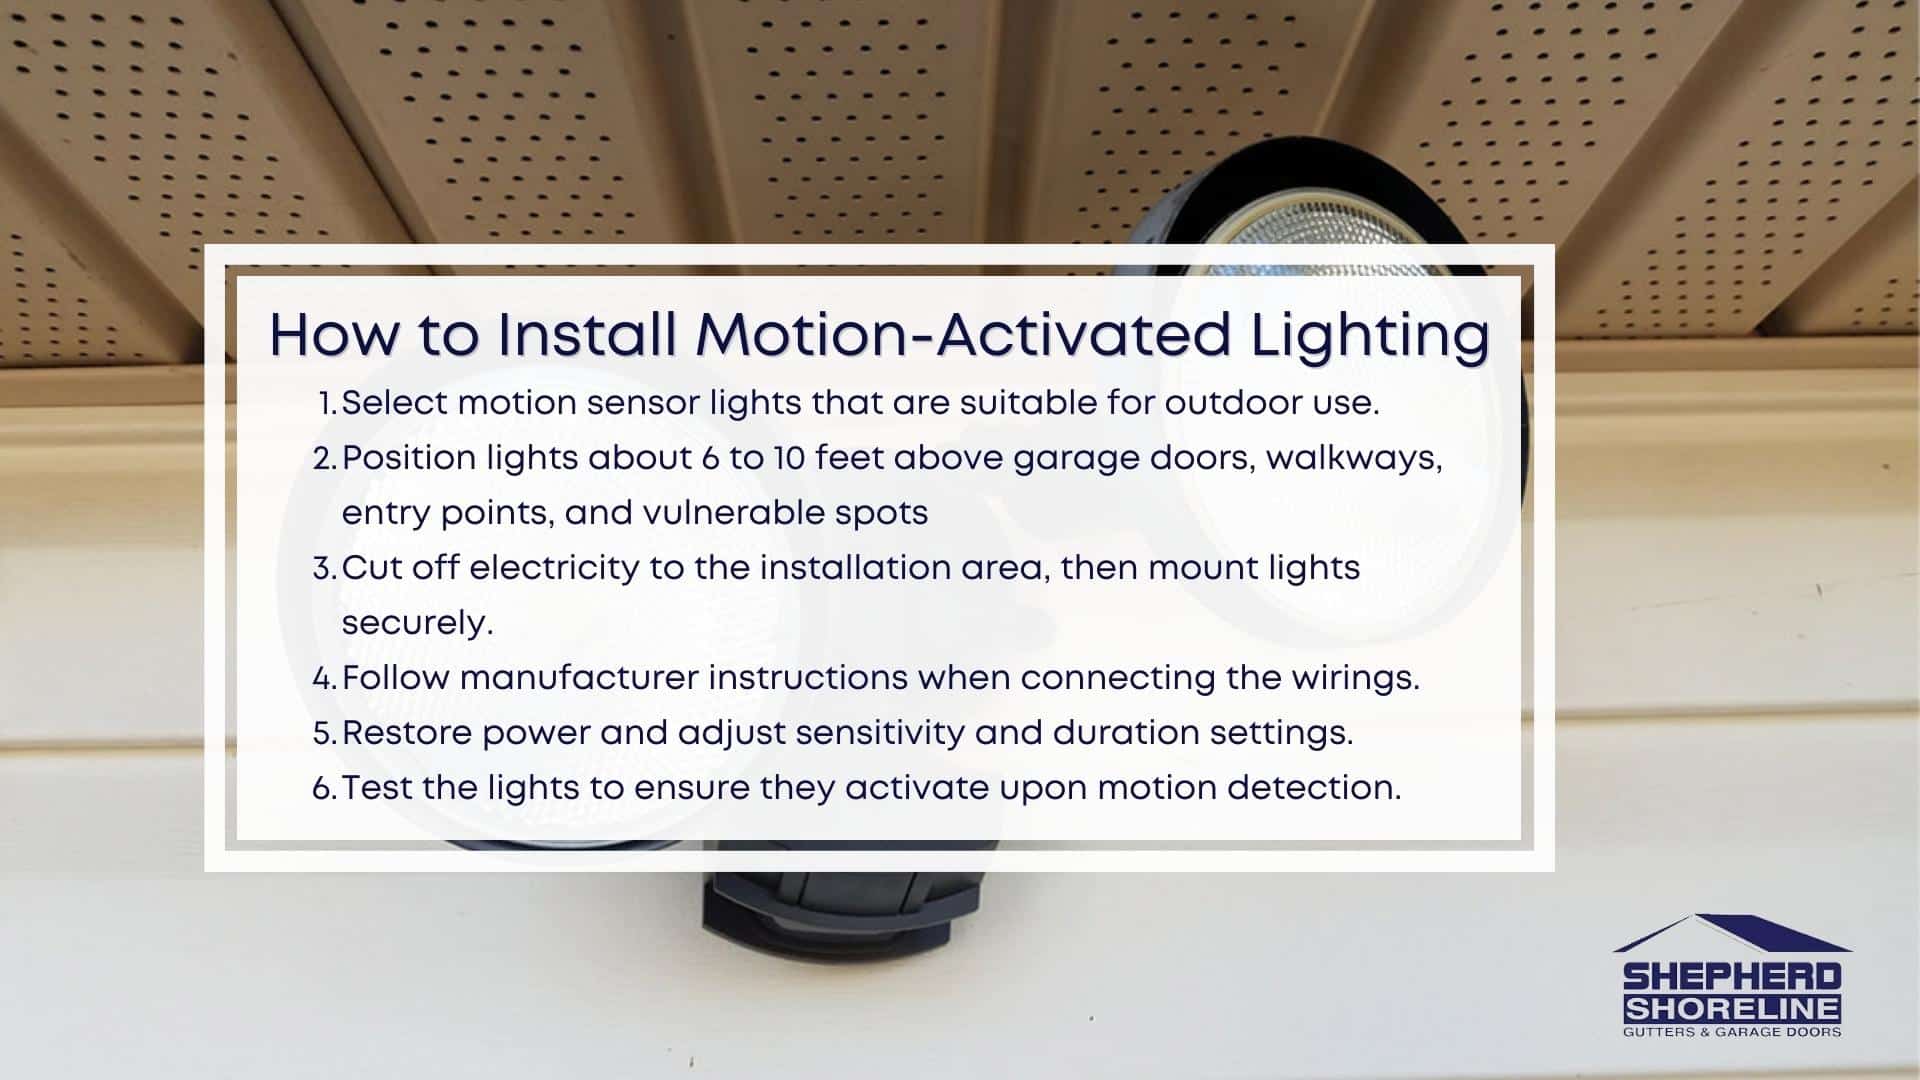 Infographic image of how to install motion-activated lighting